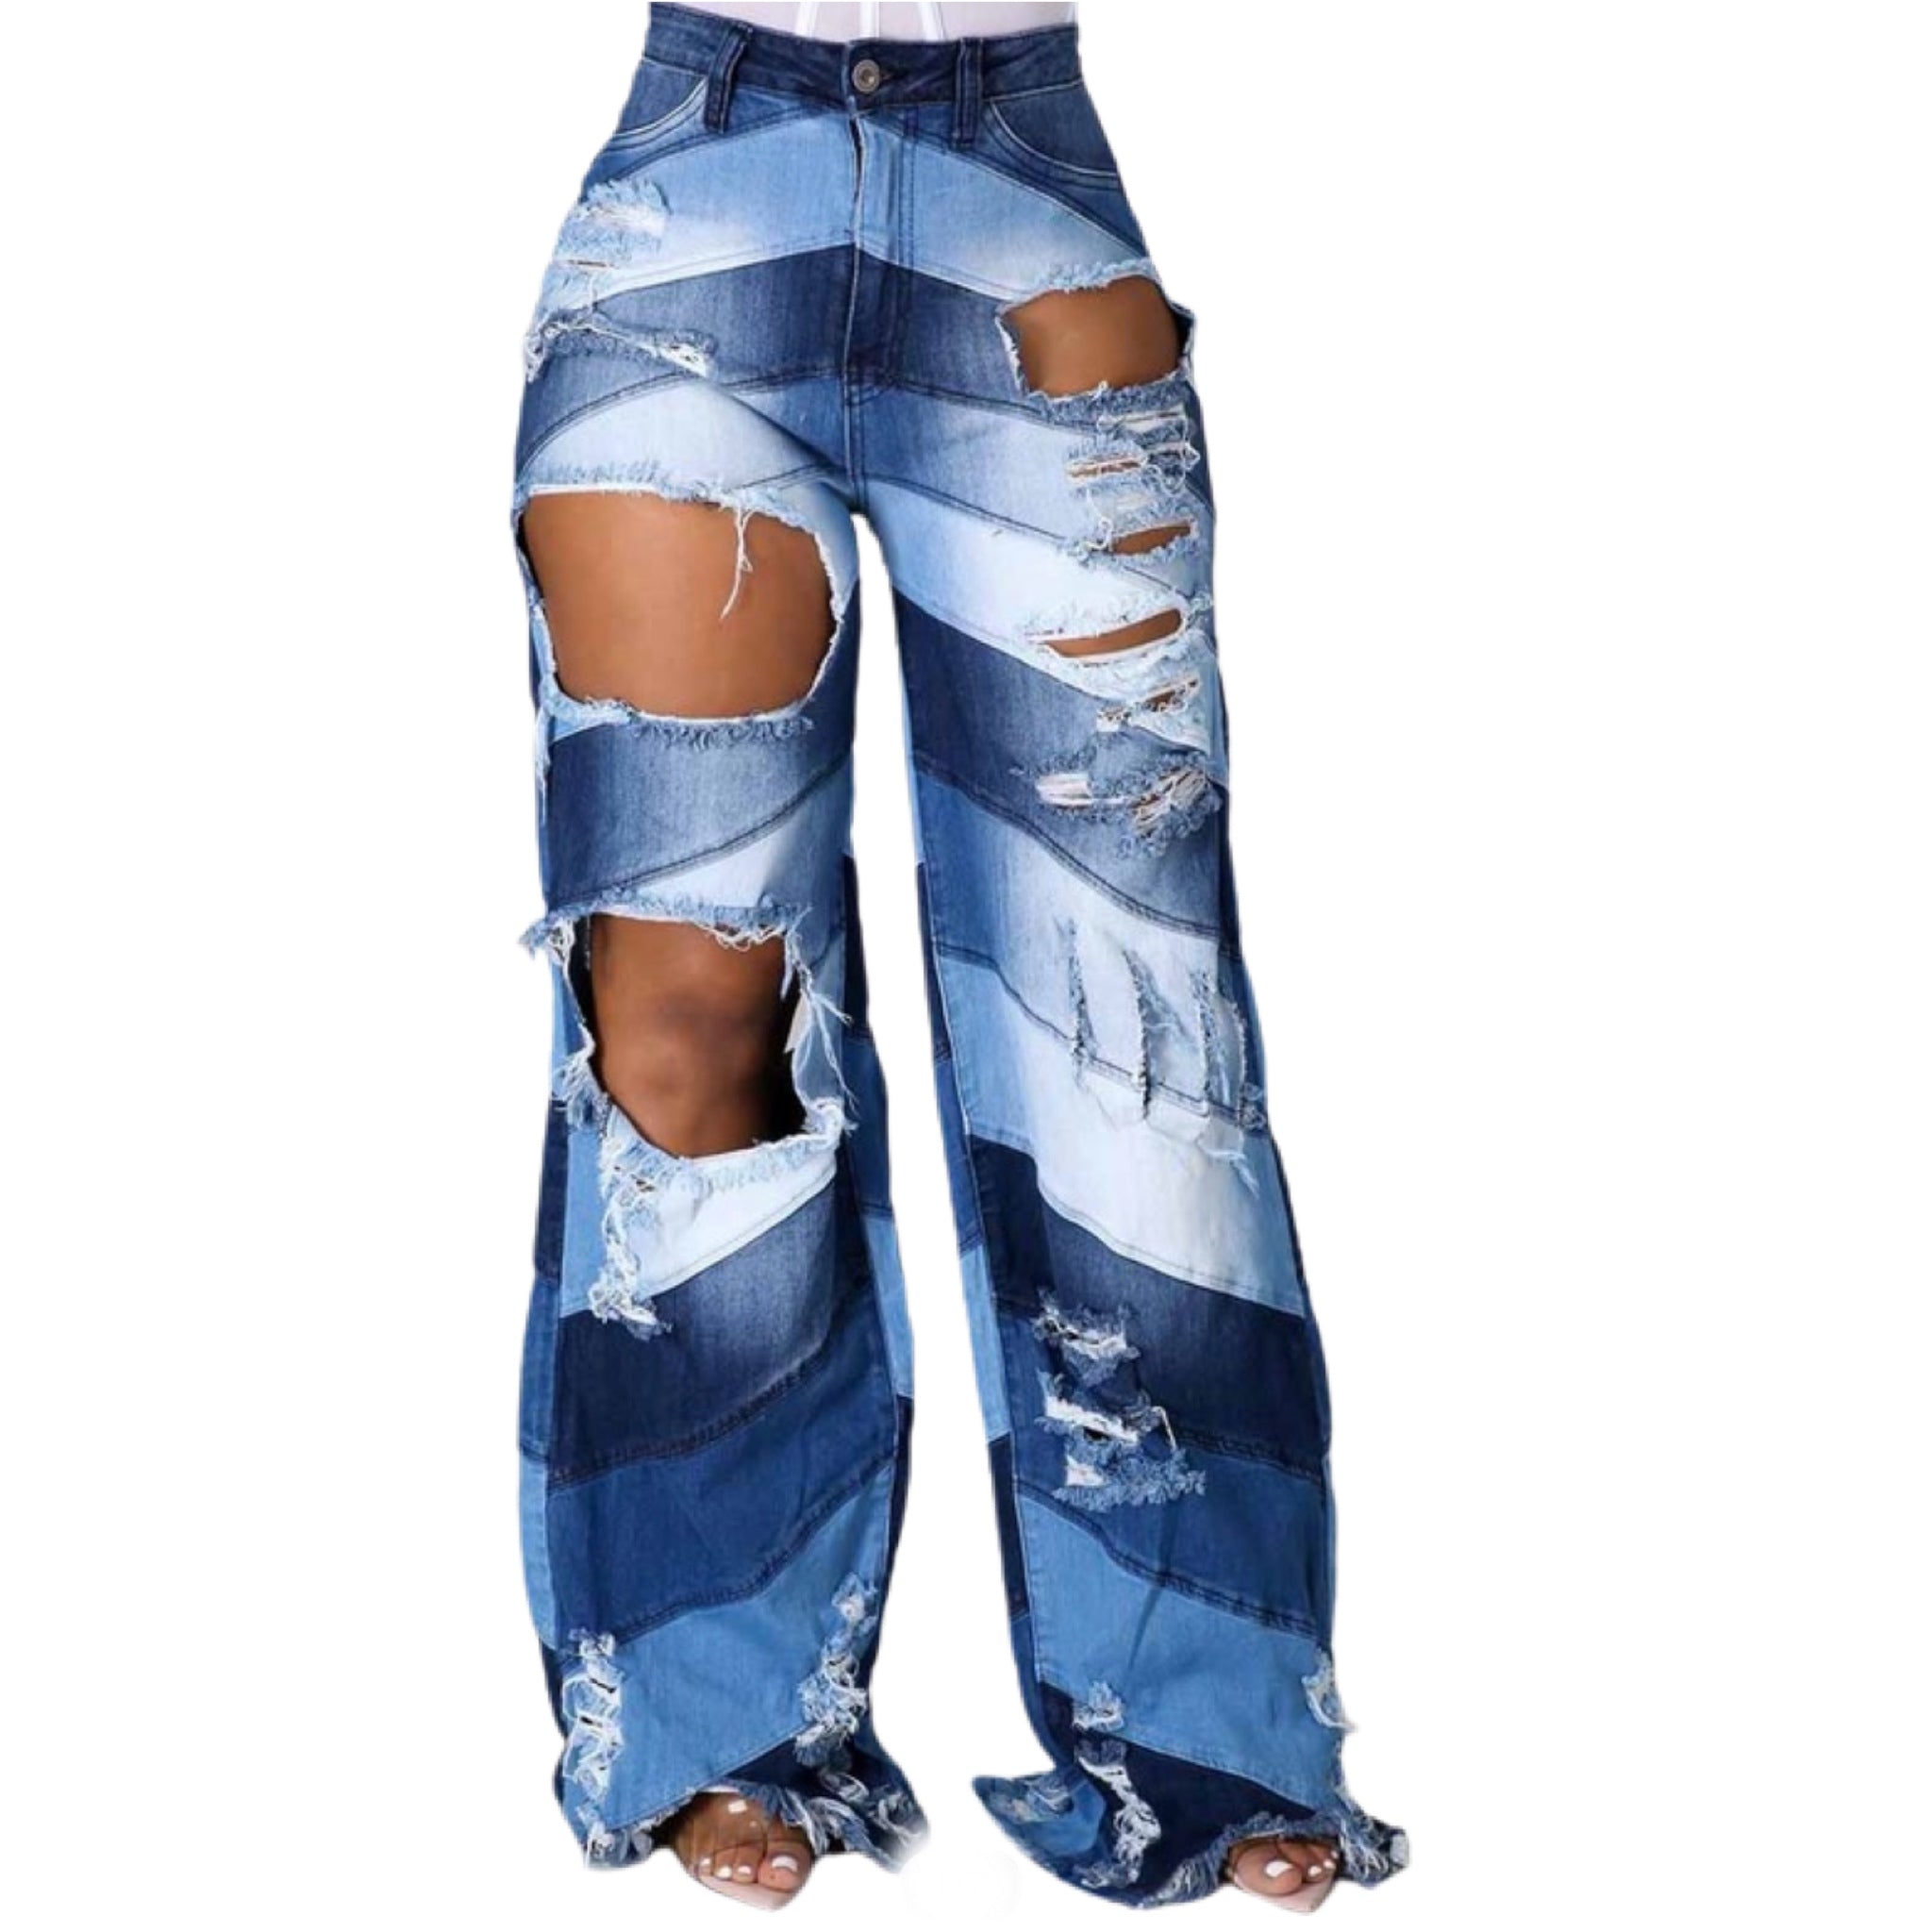 GOLDxTEAL high waist patchwork jeans. Stretch wide leg jeans with distressing.